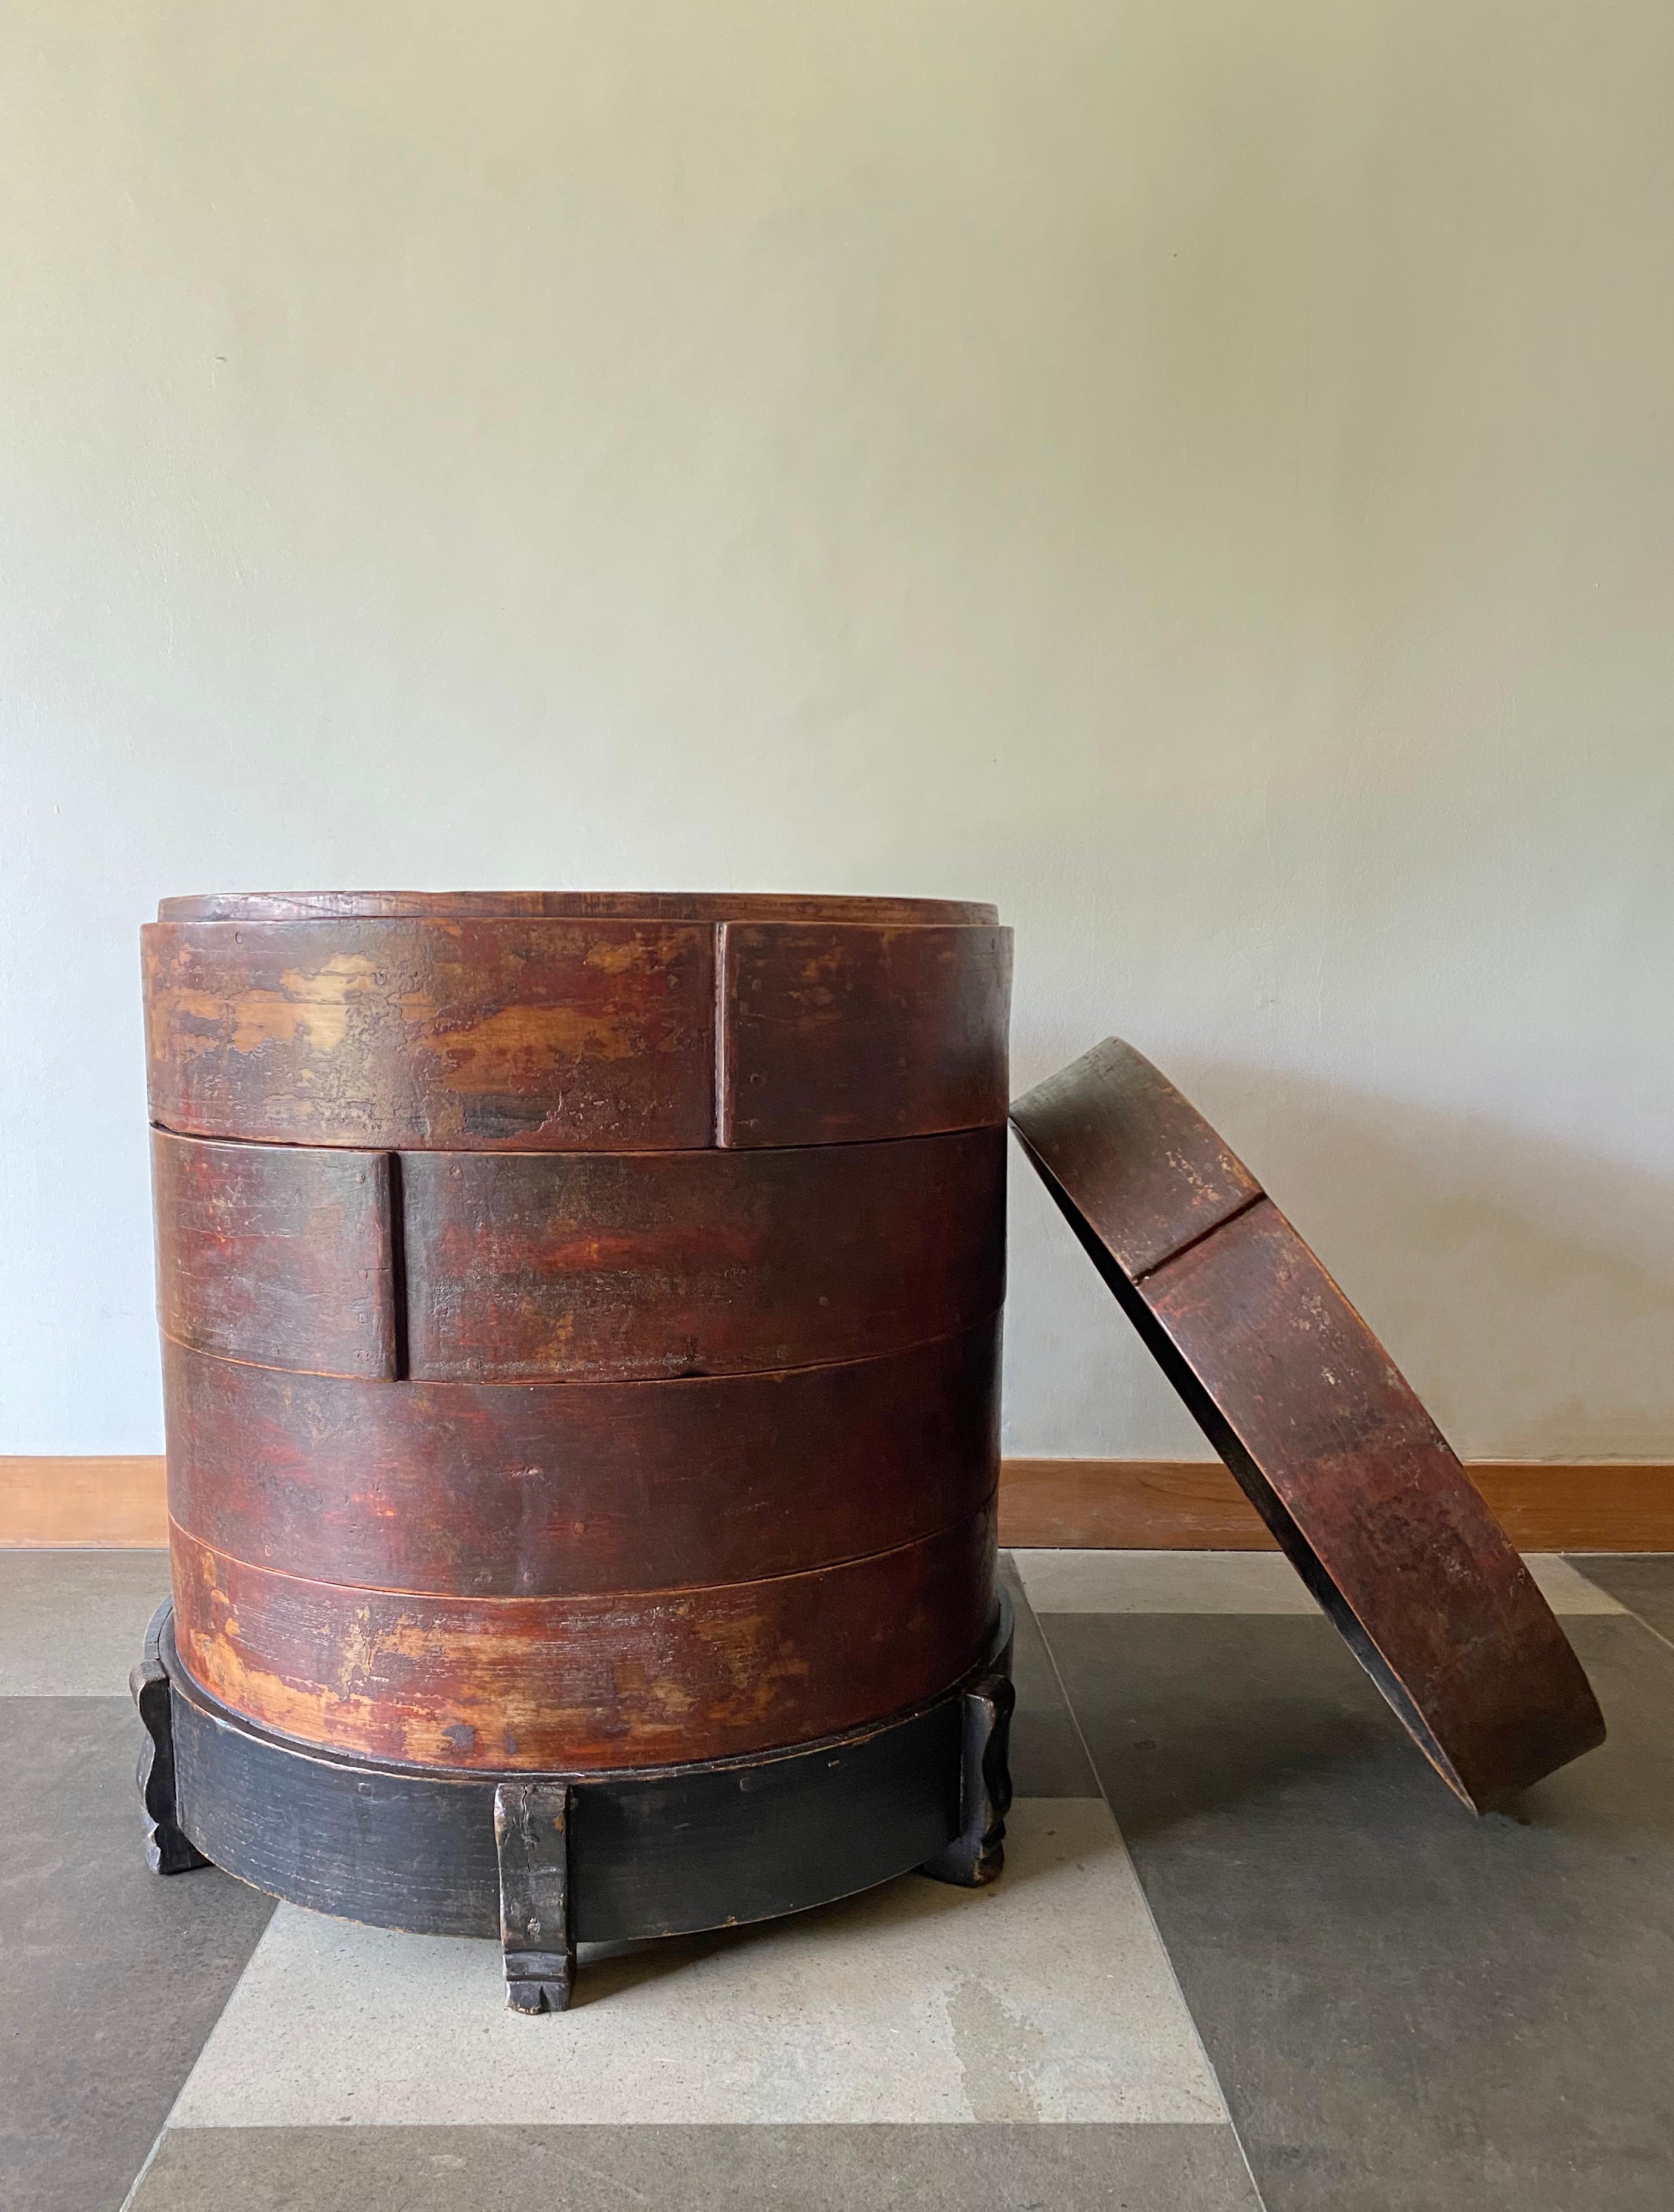 This is an exceptionally rare and unique piece. An antique, multilayered, storage container once used by street vendors to store Baozi/Bao, the filled Buns typically consumed in large parts of China. Despite its once utilitarian function its